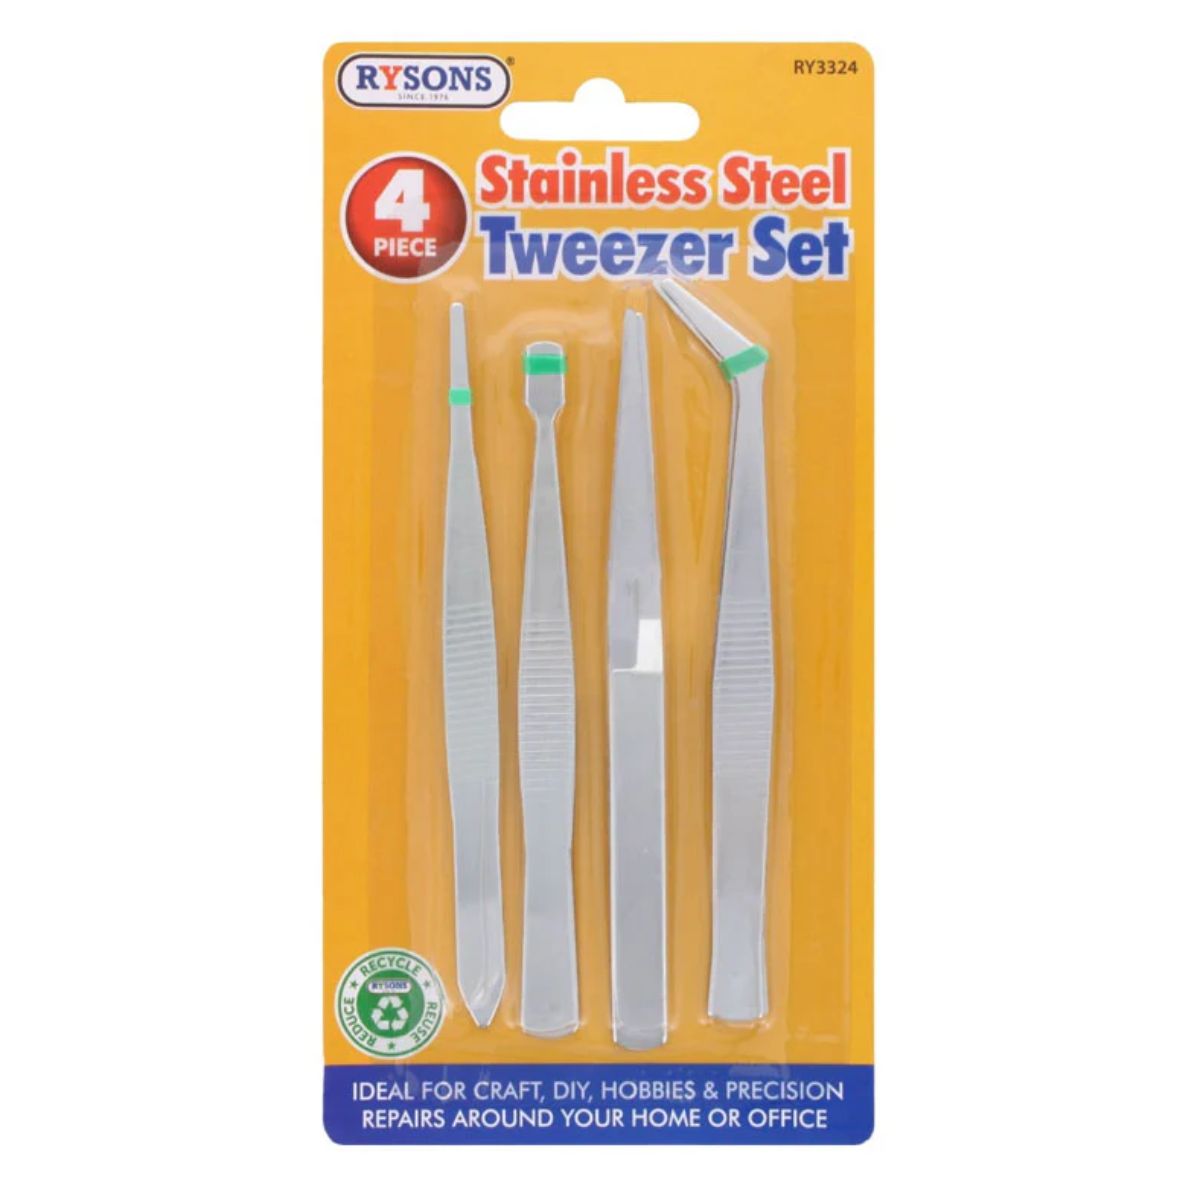 A Rysons - Steel Tweezers - 4pcs set, suitable for craft, diy, hobbies, and precision repairs.